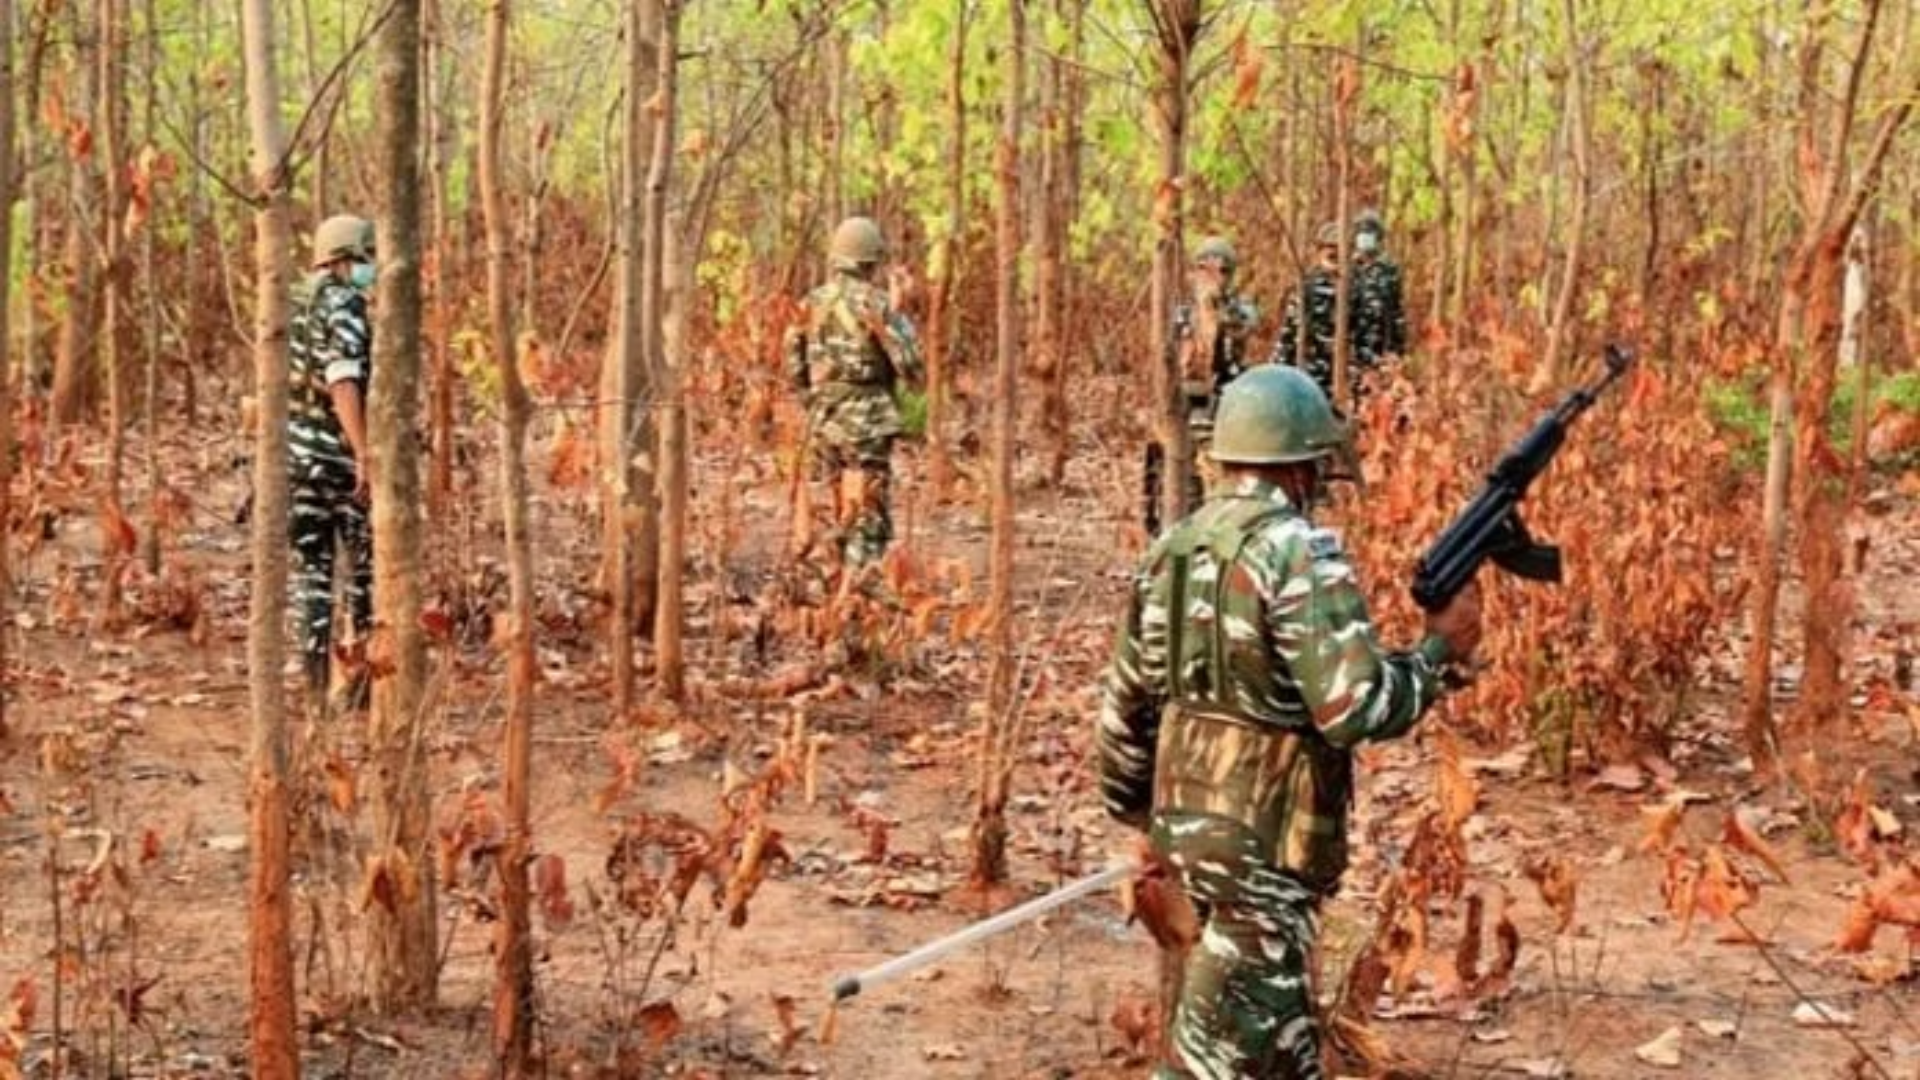 12 Maoists Killed  in Bijapur, Chhattisgarh, Security Forces Make Significant Strides